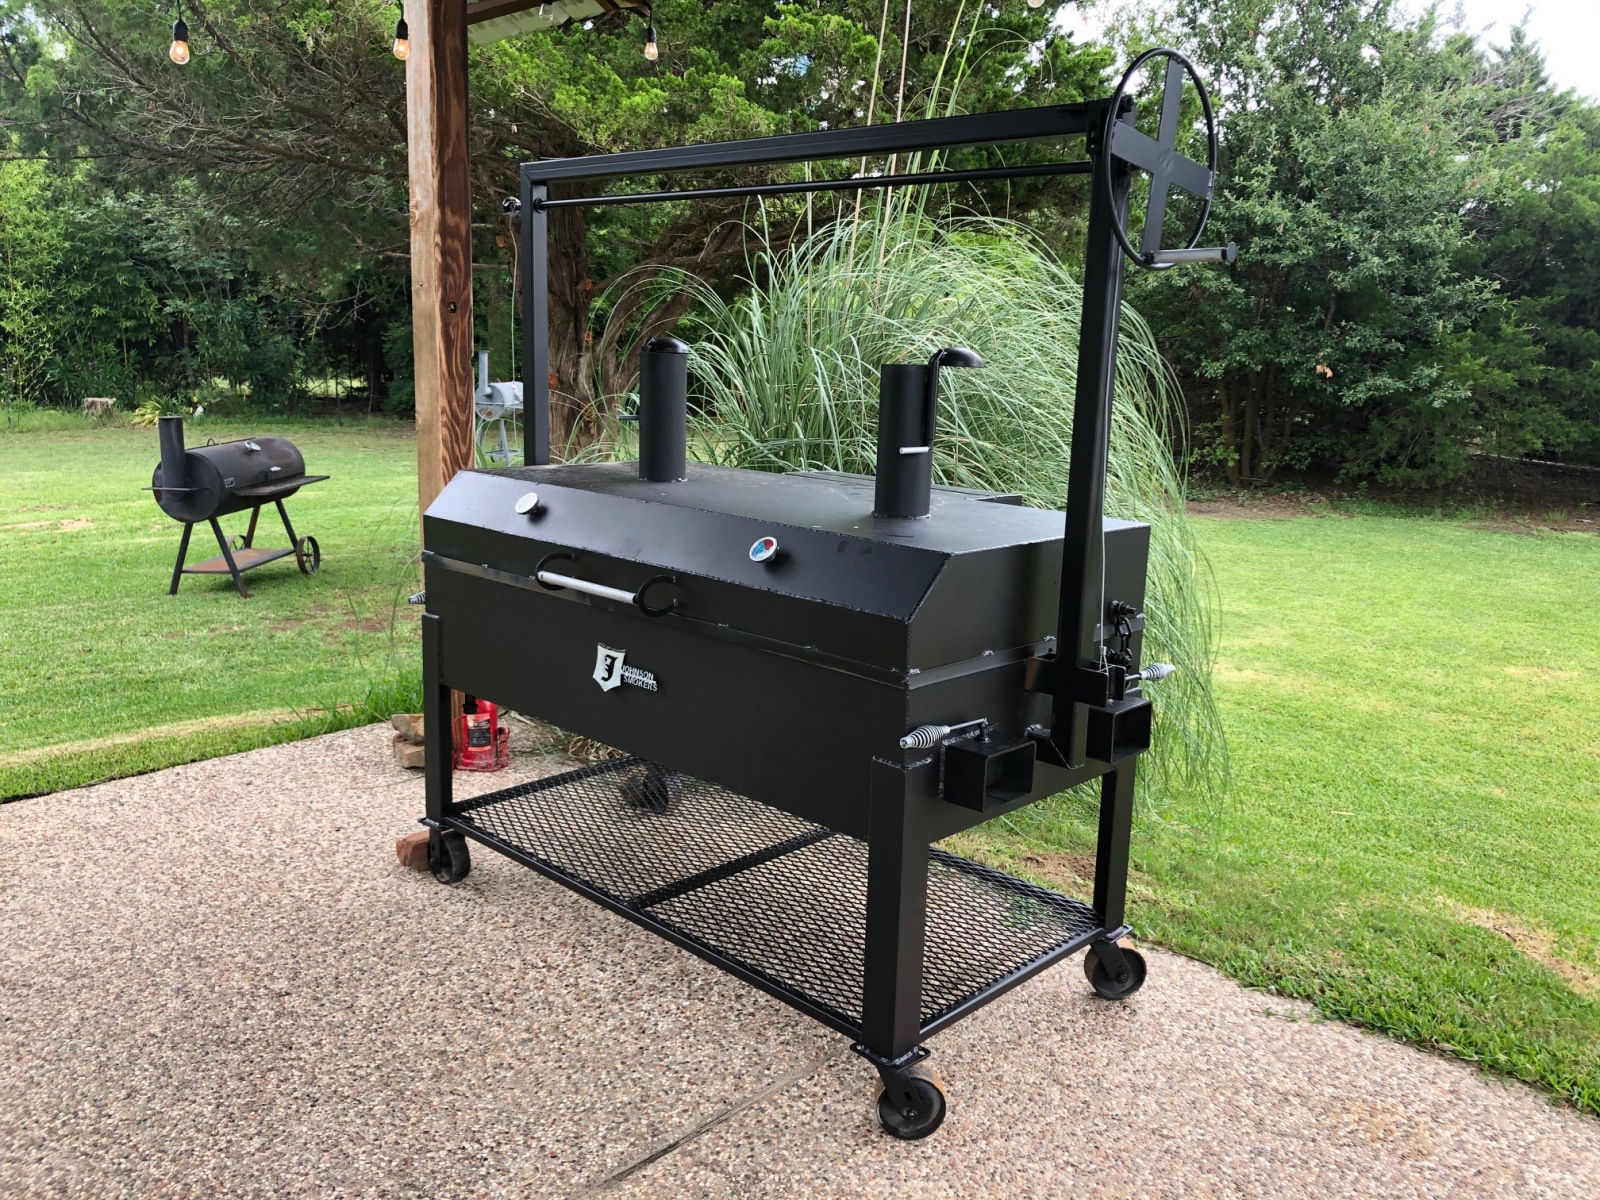 Extreme Duty Grill Pit: Santa Maria Style